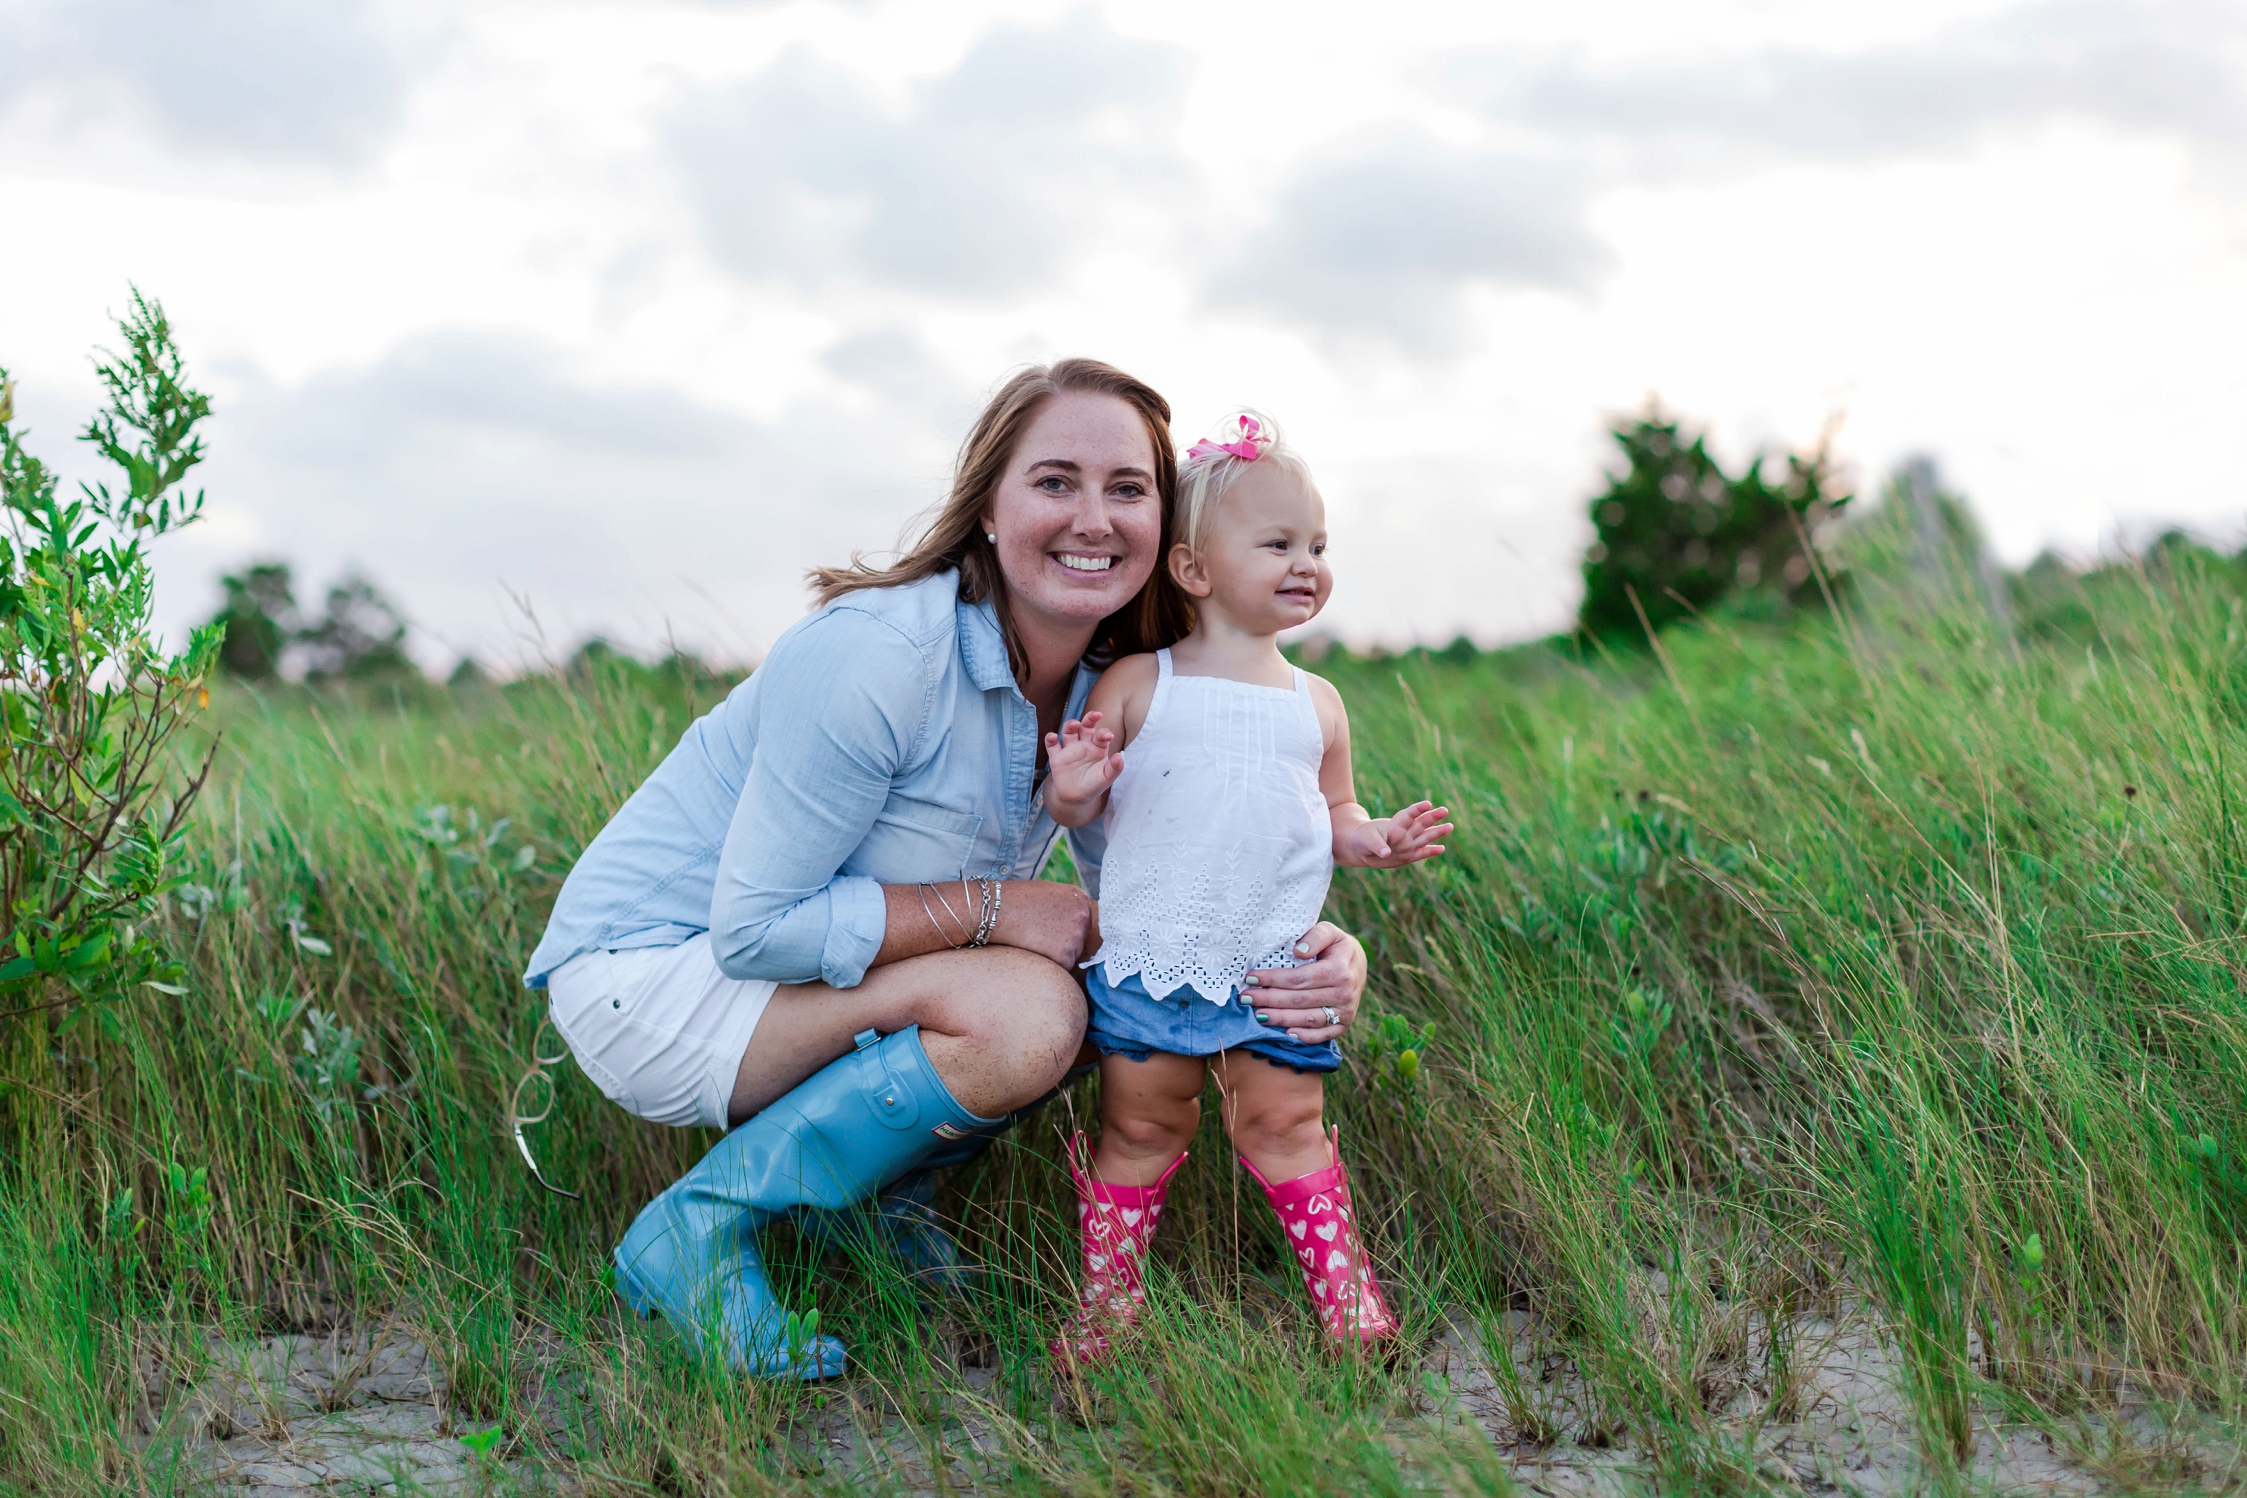 Virginia Children and Family Outdoor Lifestyle Photography | Brooke Tucker Photography